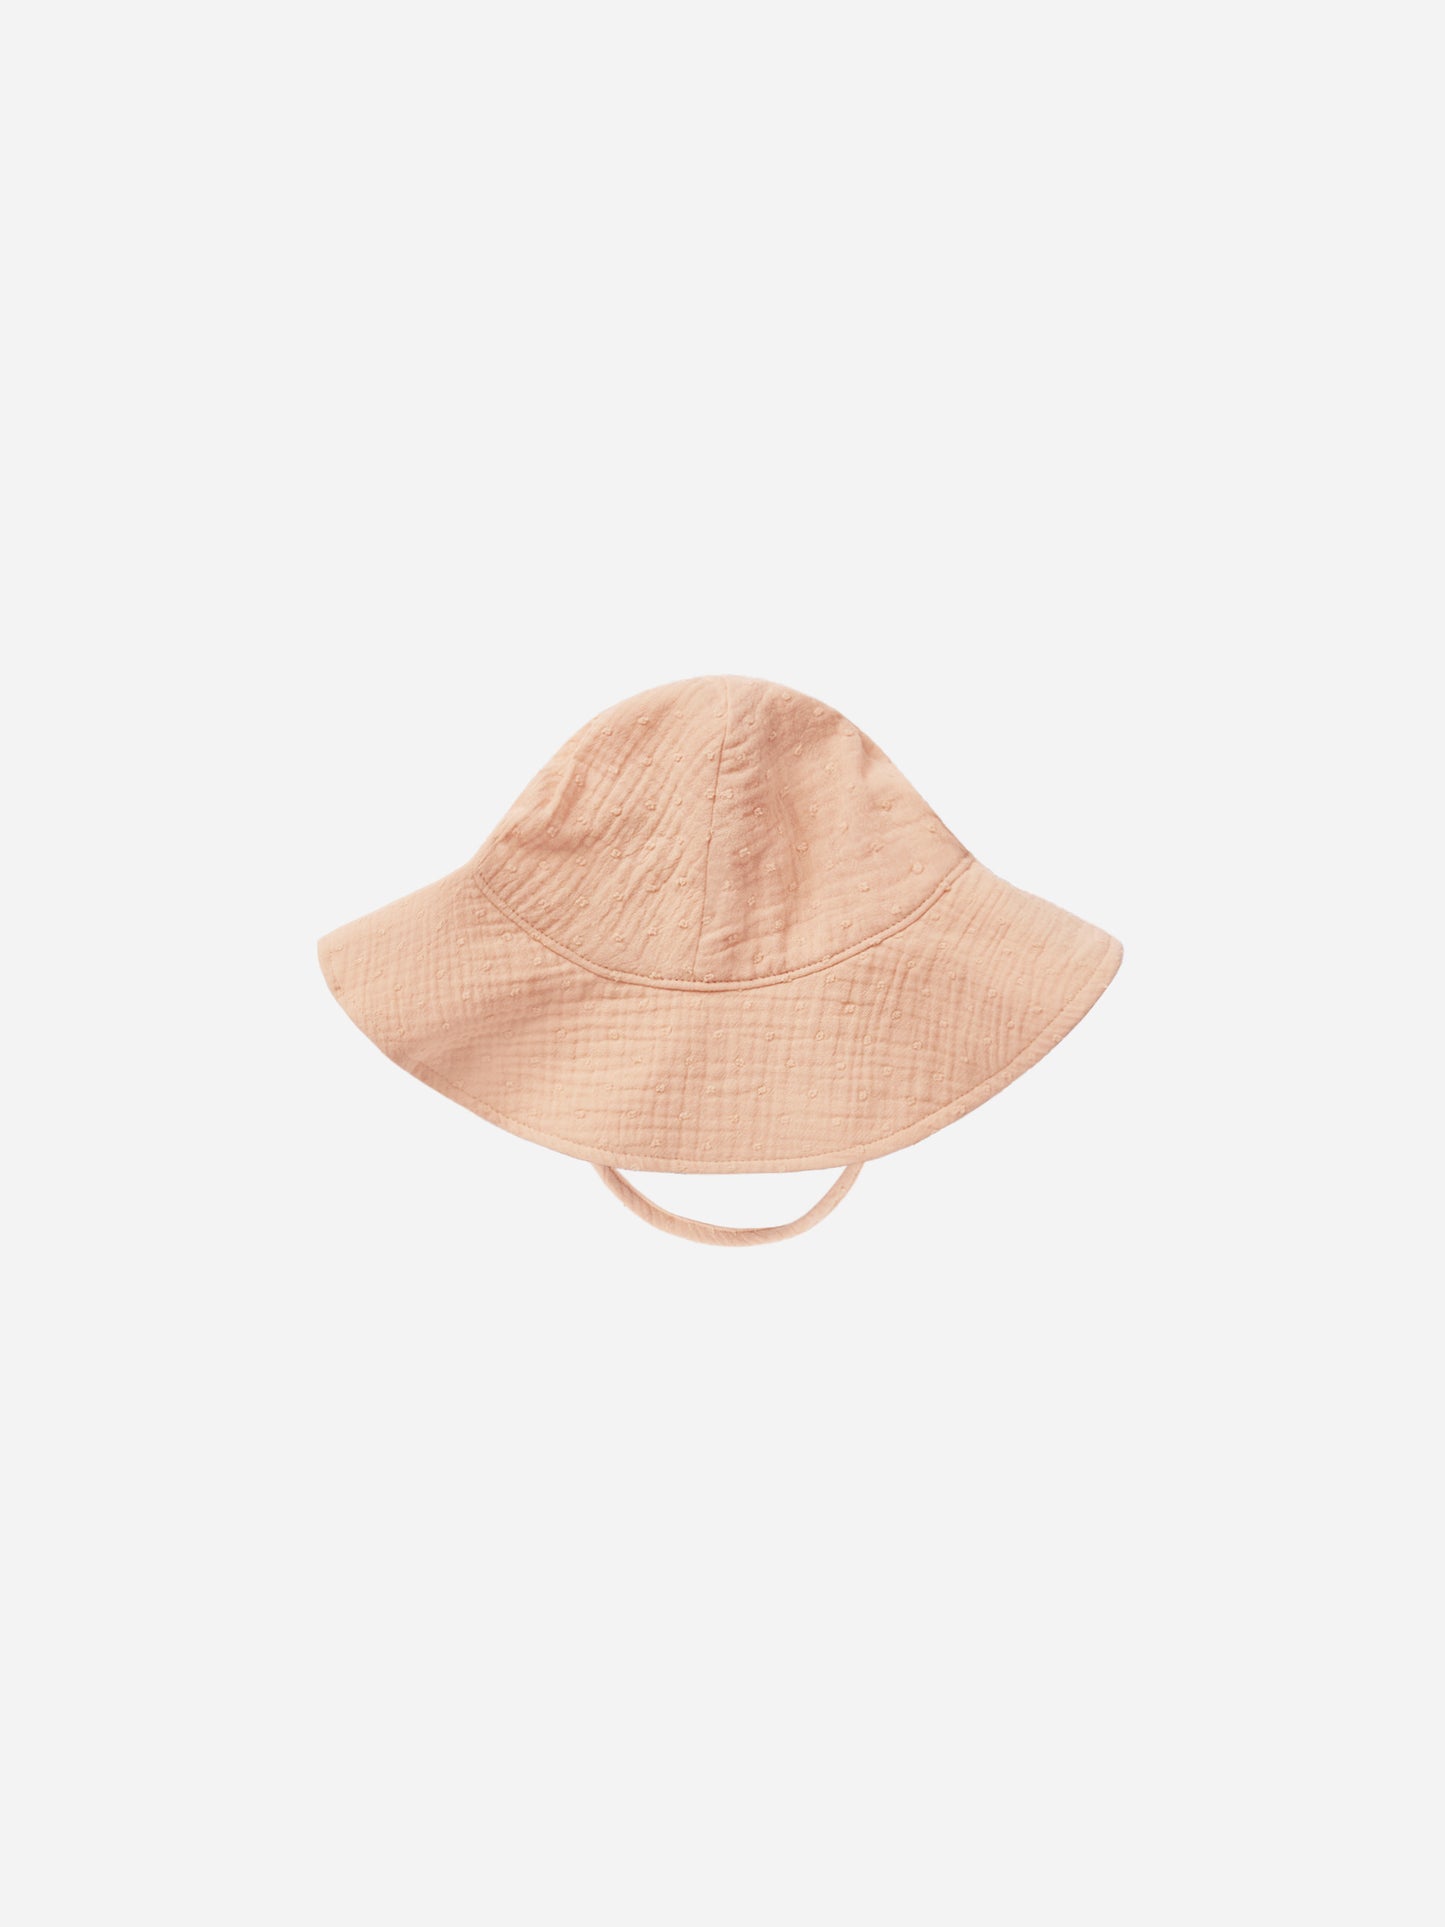 Floppy Sun Hat || Apricot - Rylee + Cru | Kids Clothes | Trendy Baby Clothes | Modern Infant Outfits |